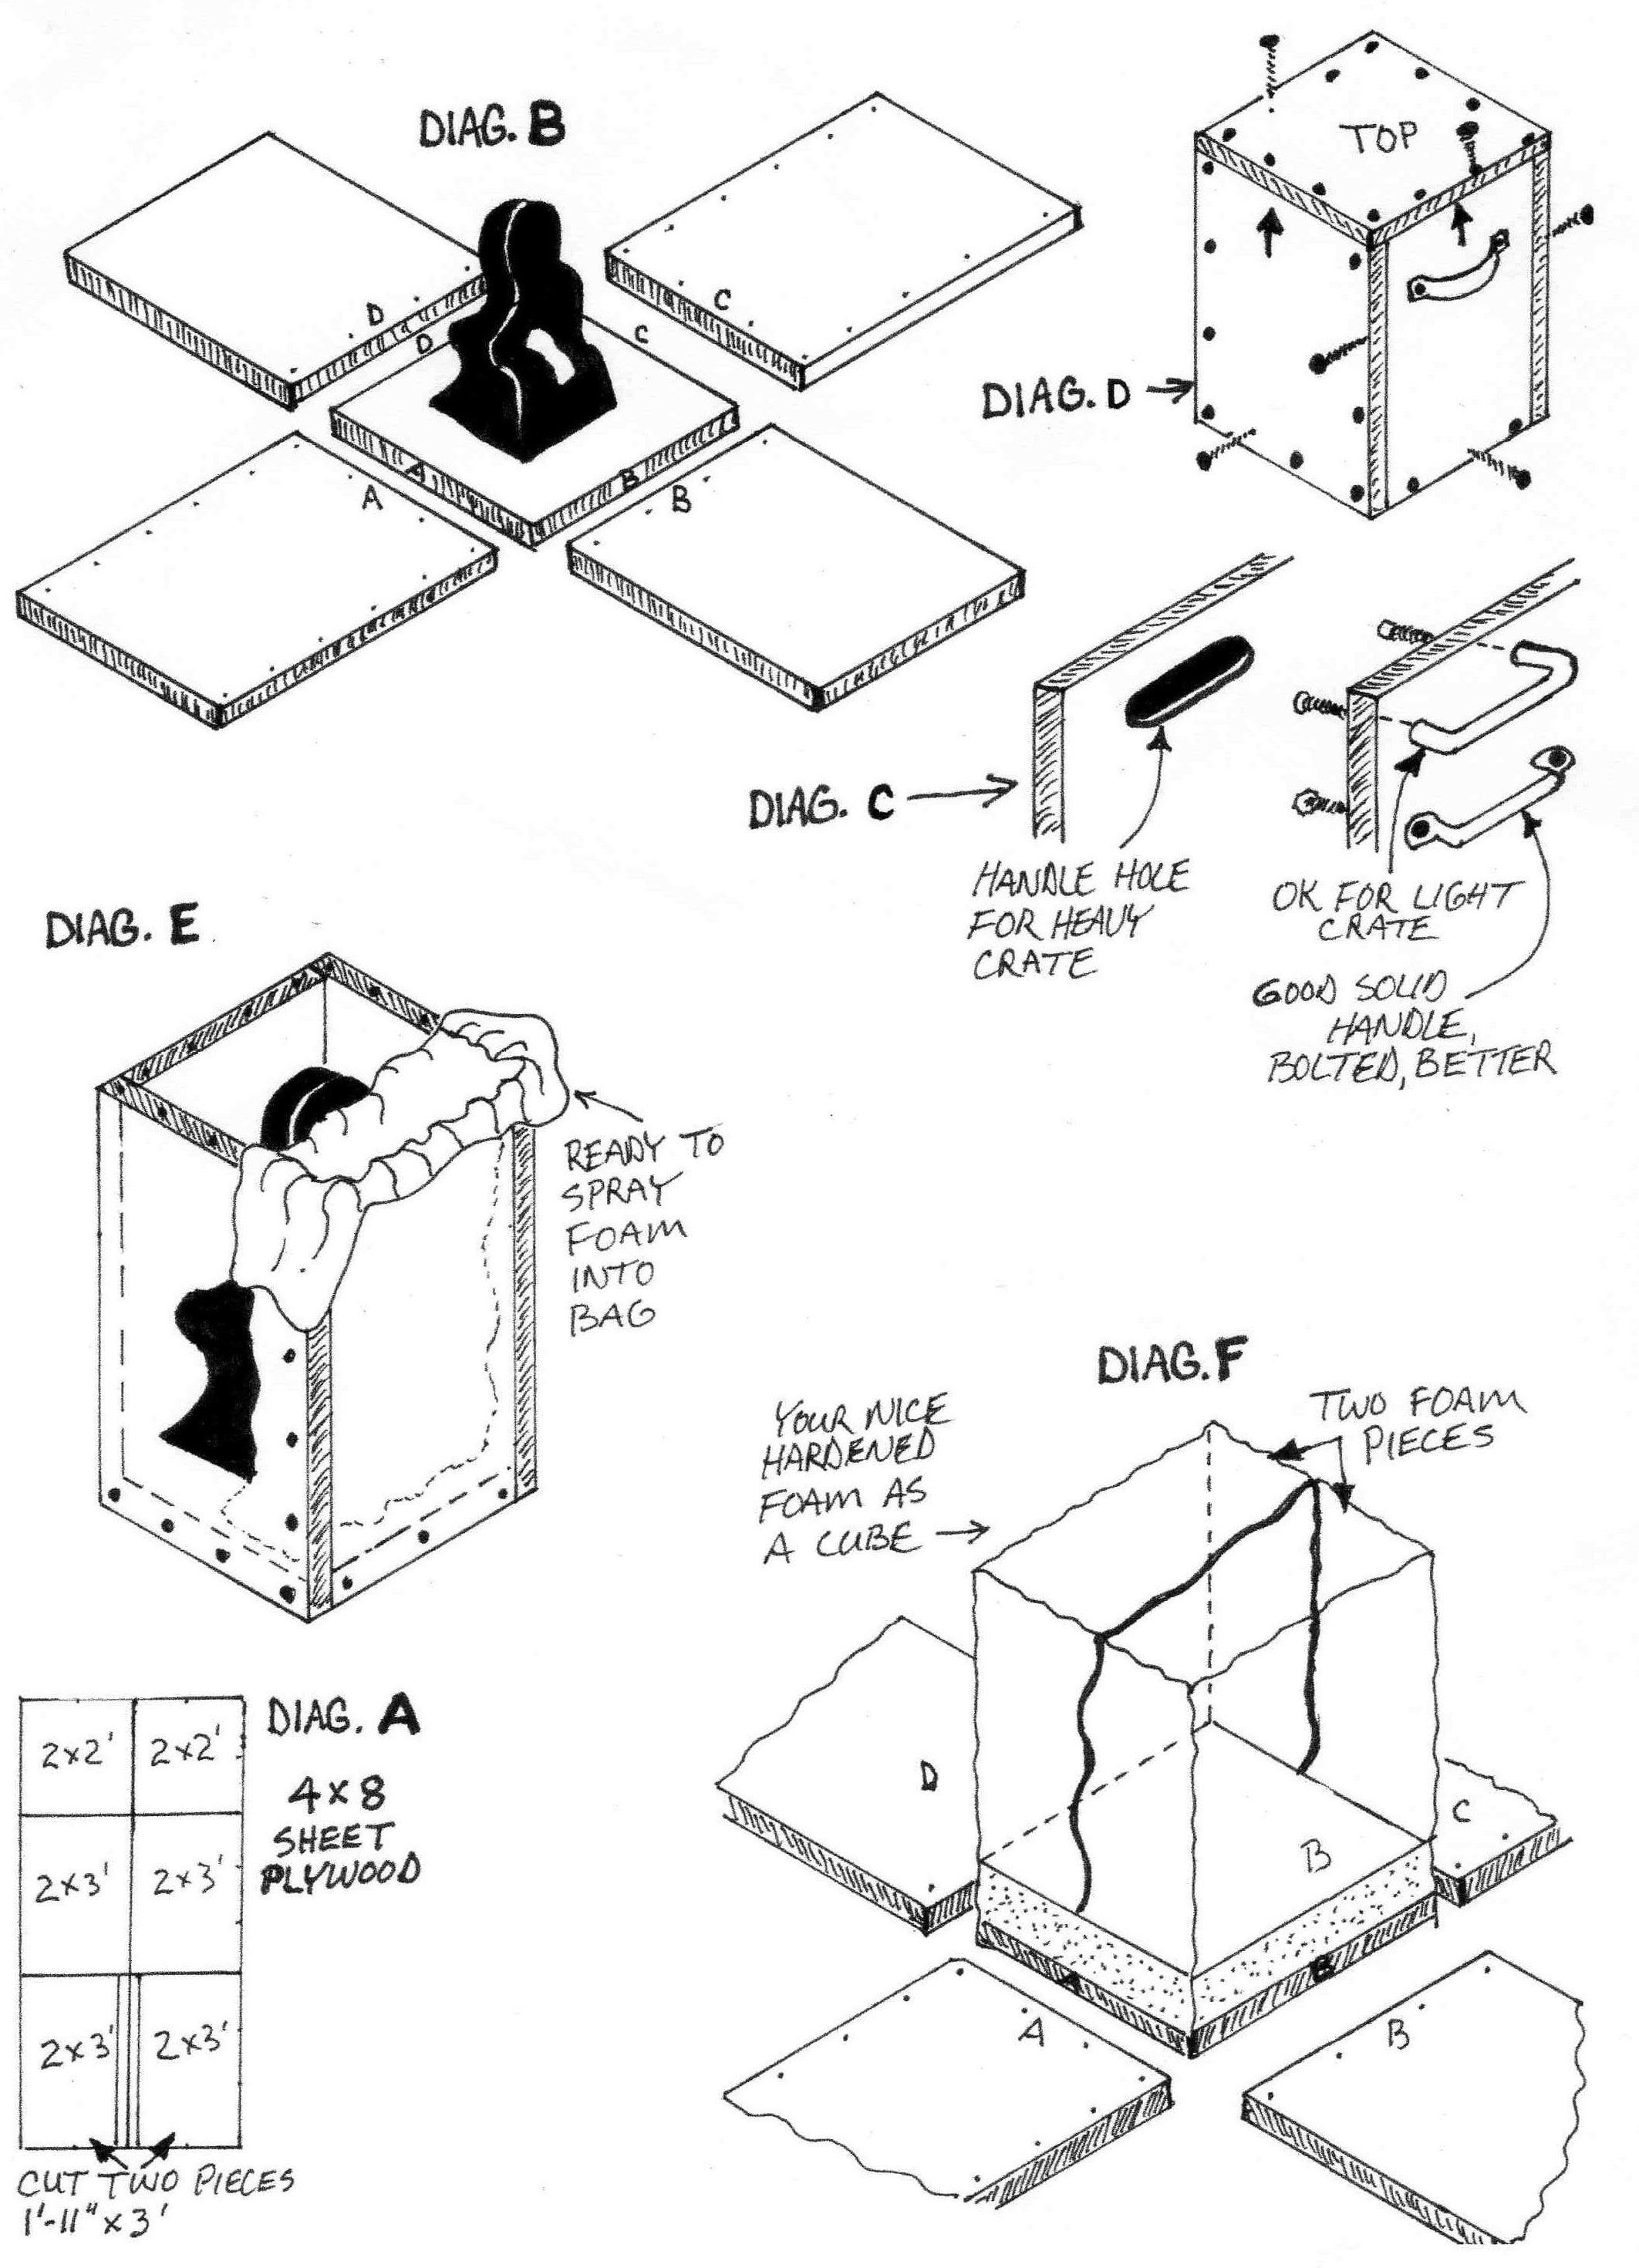 Click to enlarge Leon's Crate building diagram.